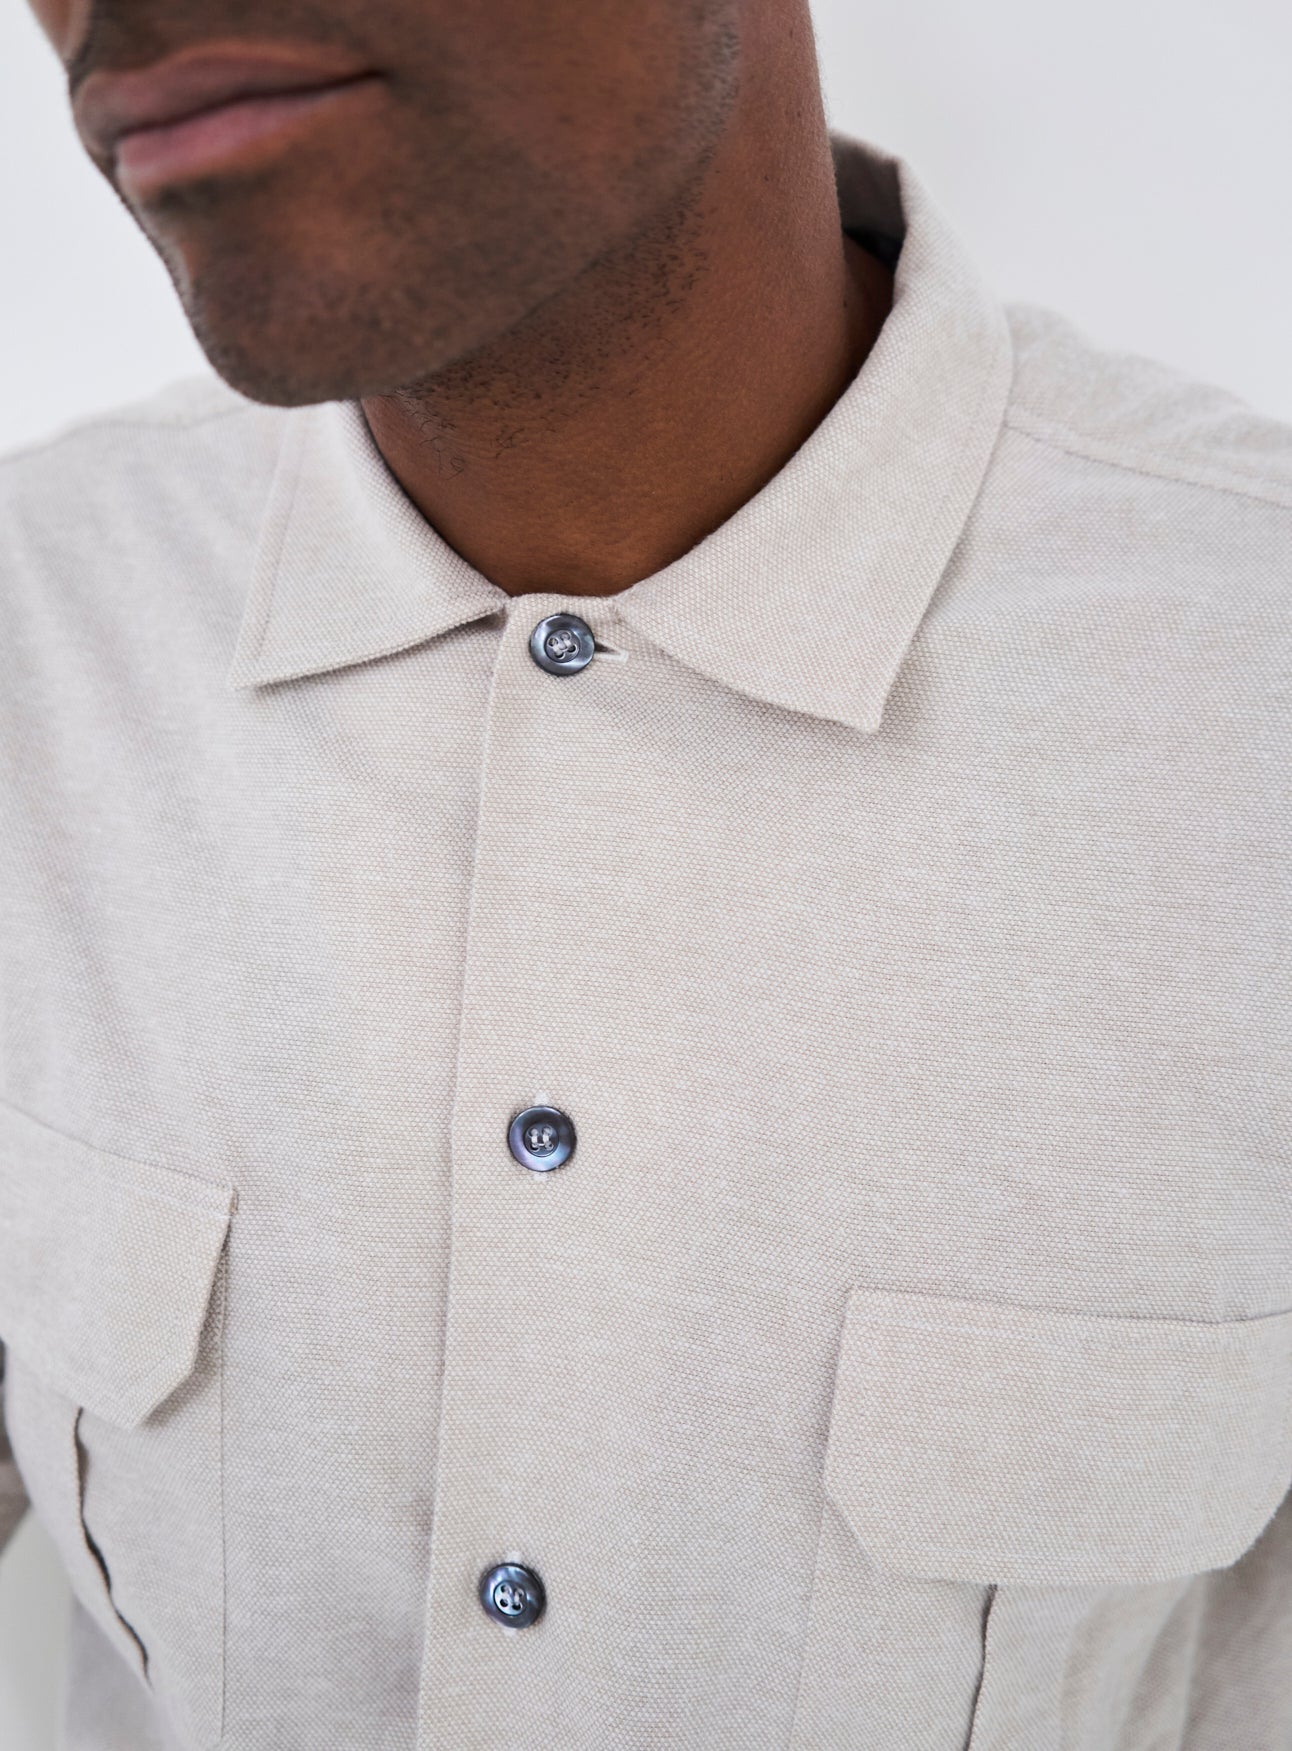 Recycled Oatmeal Flannel Overshirt Over-Shirts Neem Global 